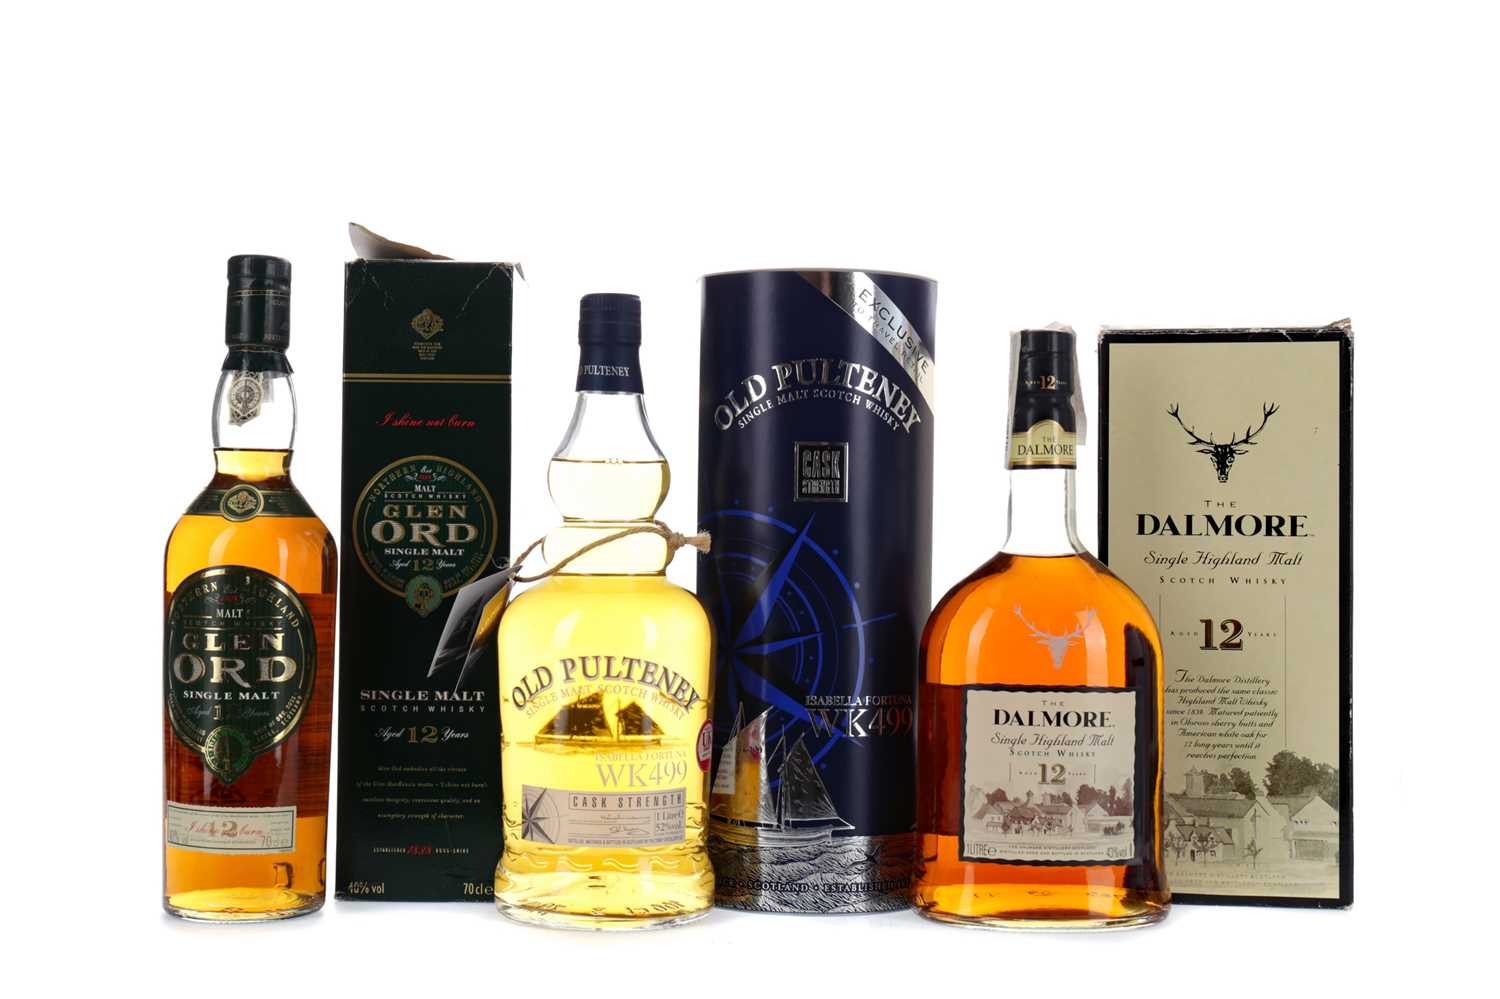 Lot 131 - OLD PULTENEY ISABELLA FORTUNA WK499, DALMORE 12 YEARS OLD AND GLEN ORD 12 YEARS OLD